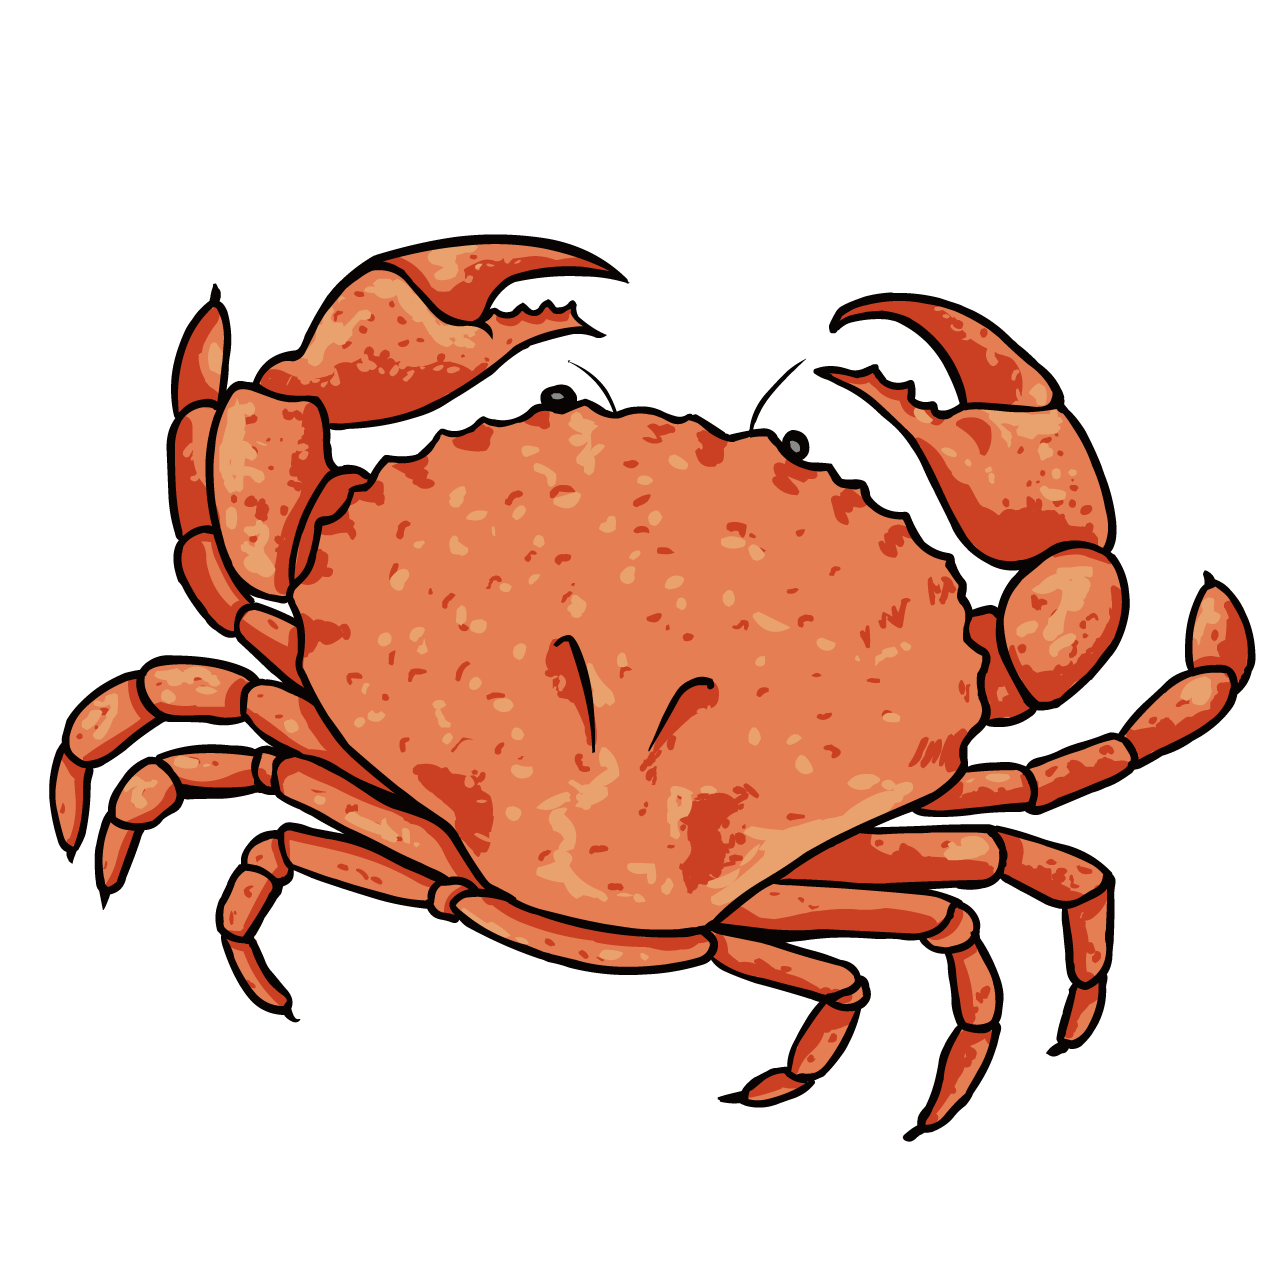 Lobster clipart crab, Lobster crab Transparent FREE for download on